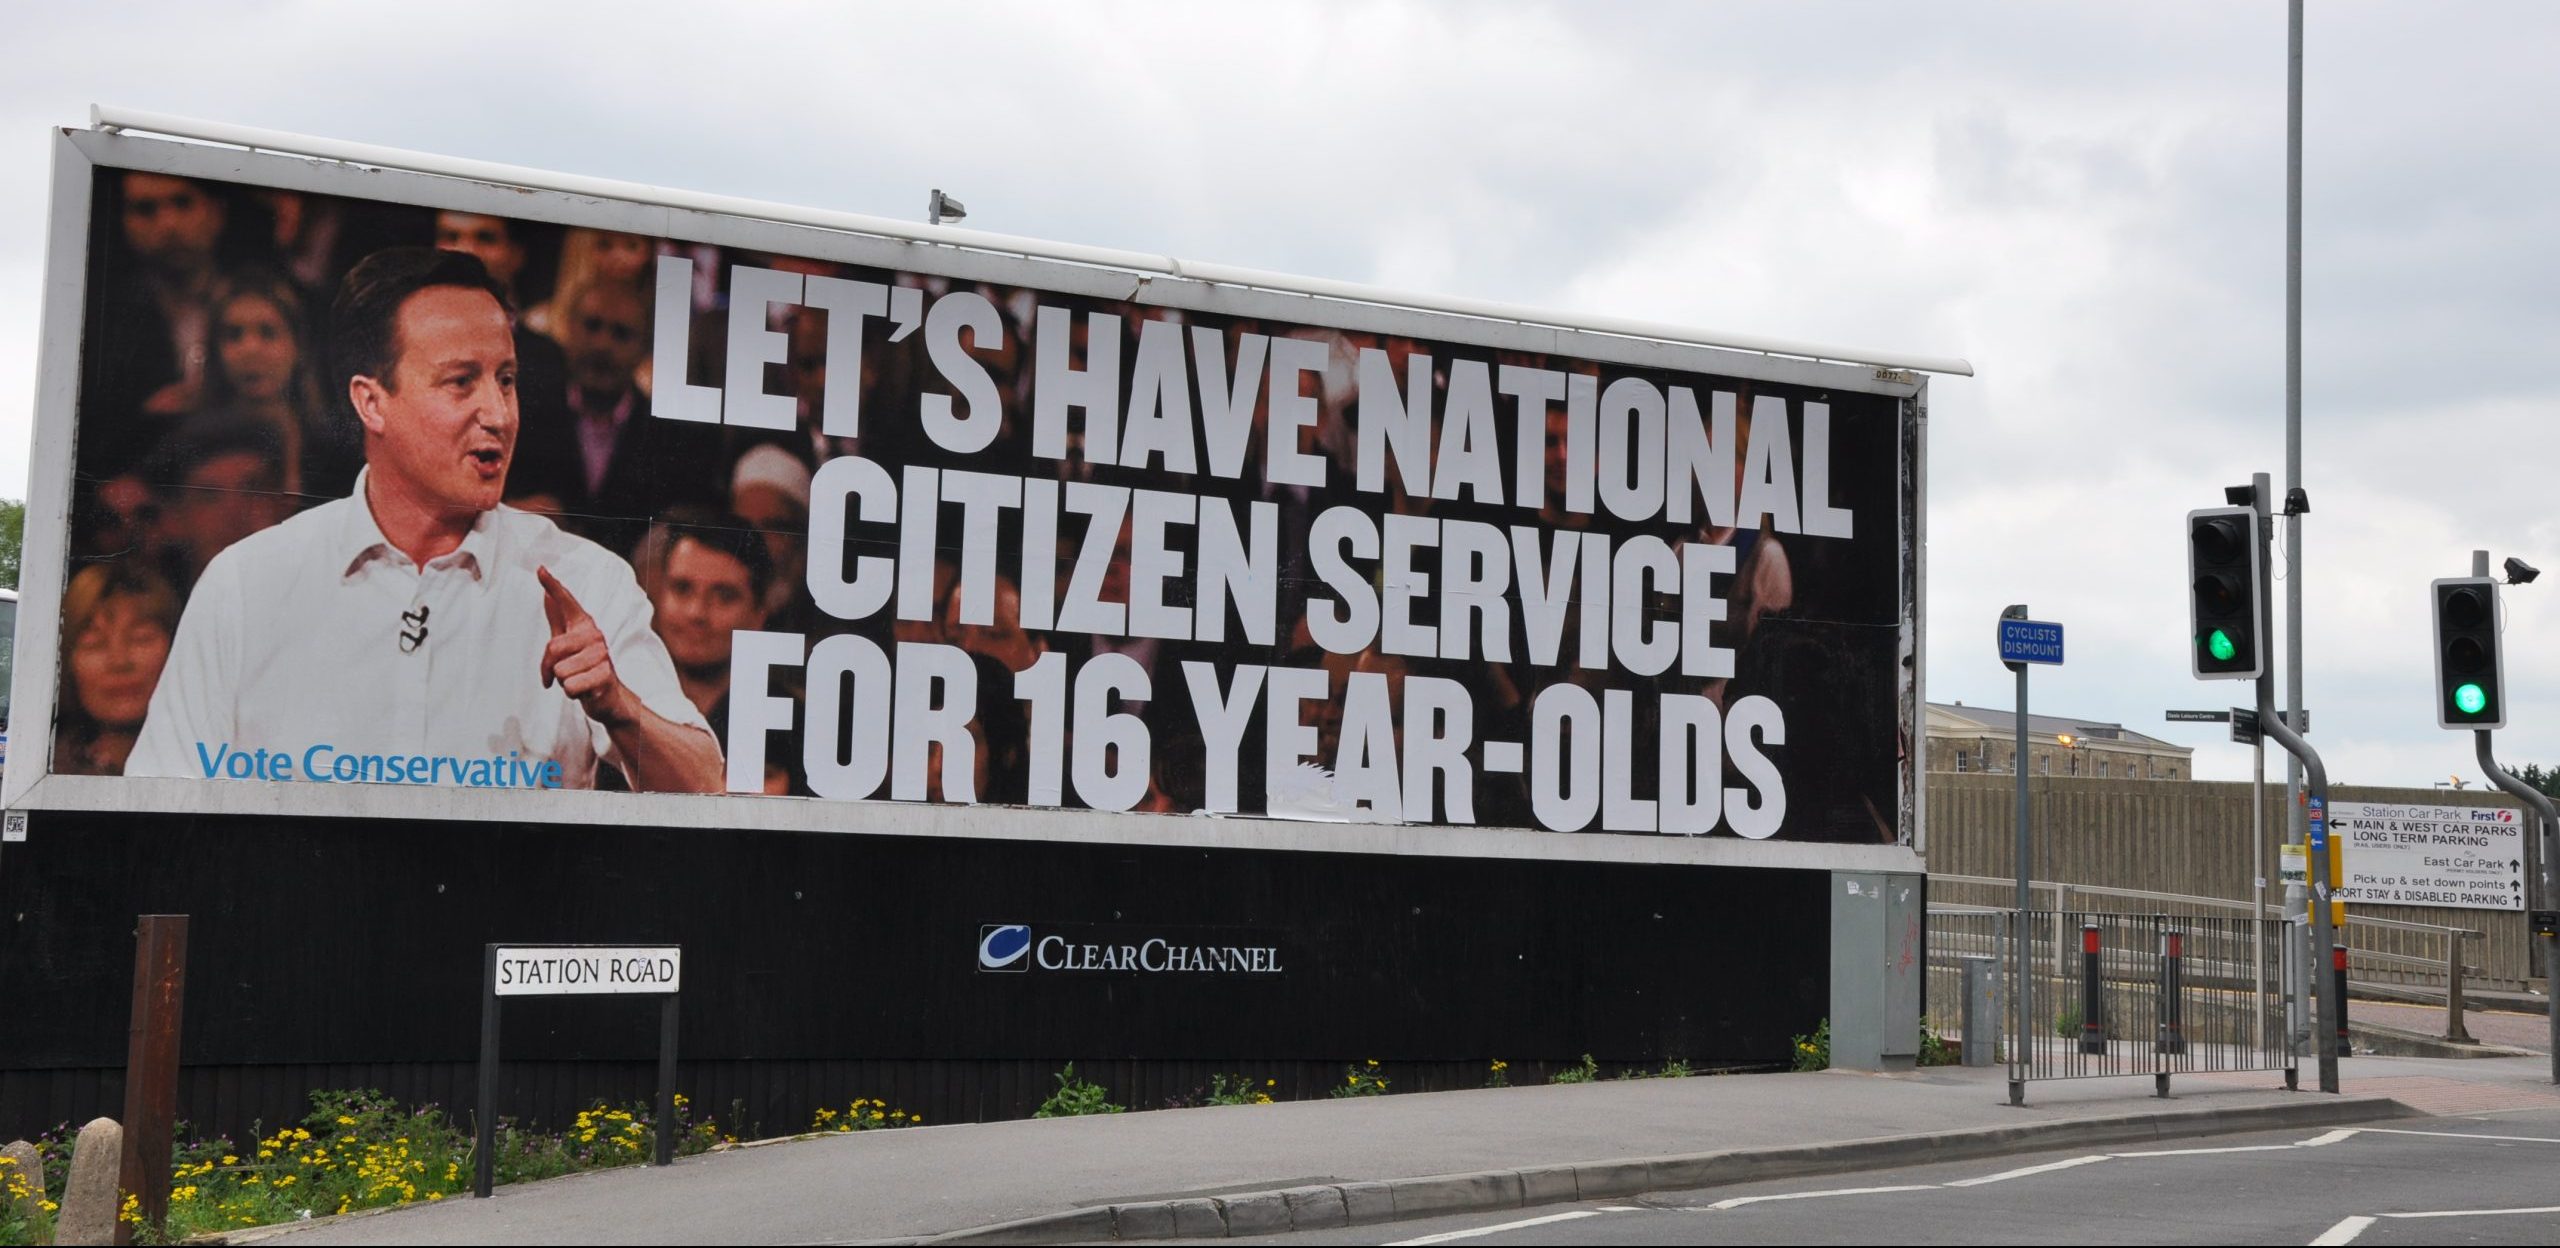 David Cameron with the text 'Let's have national citizen service for 16 year-olds.'